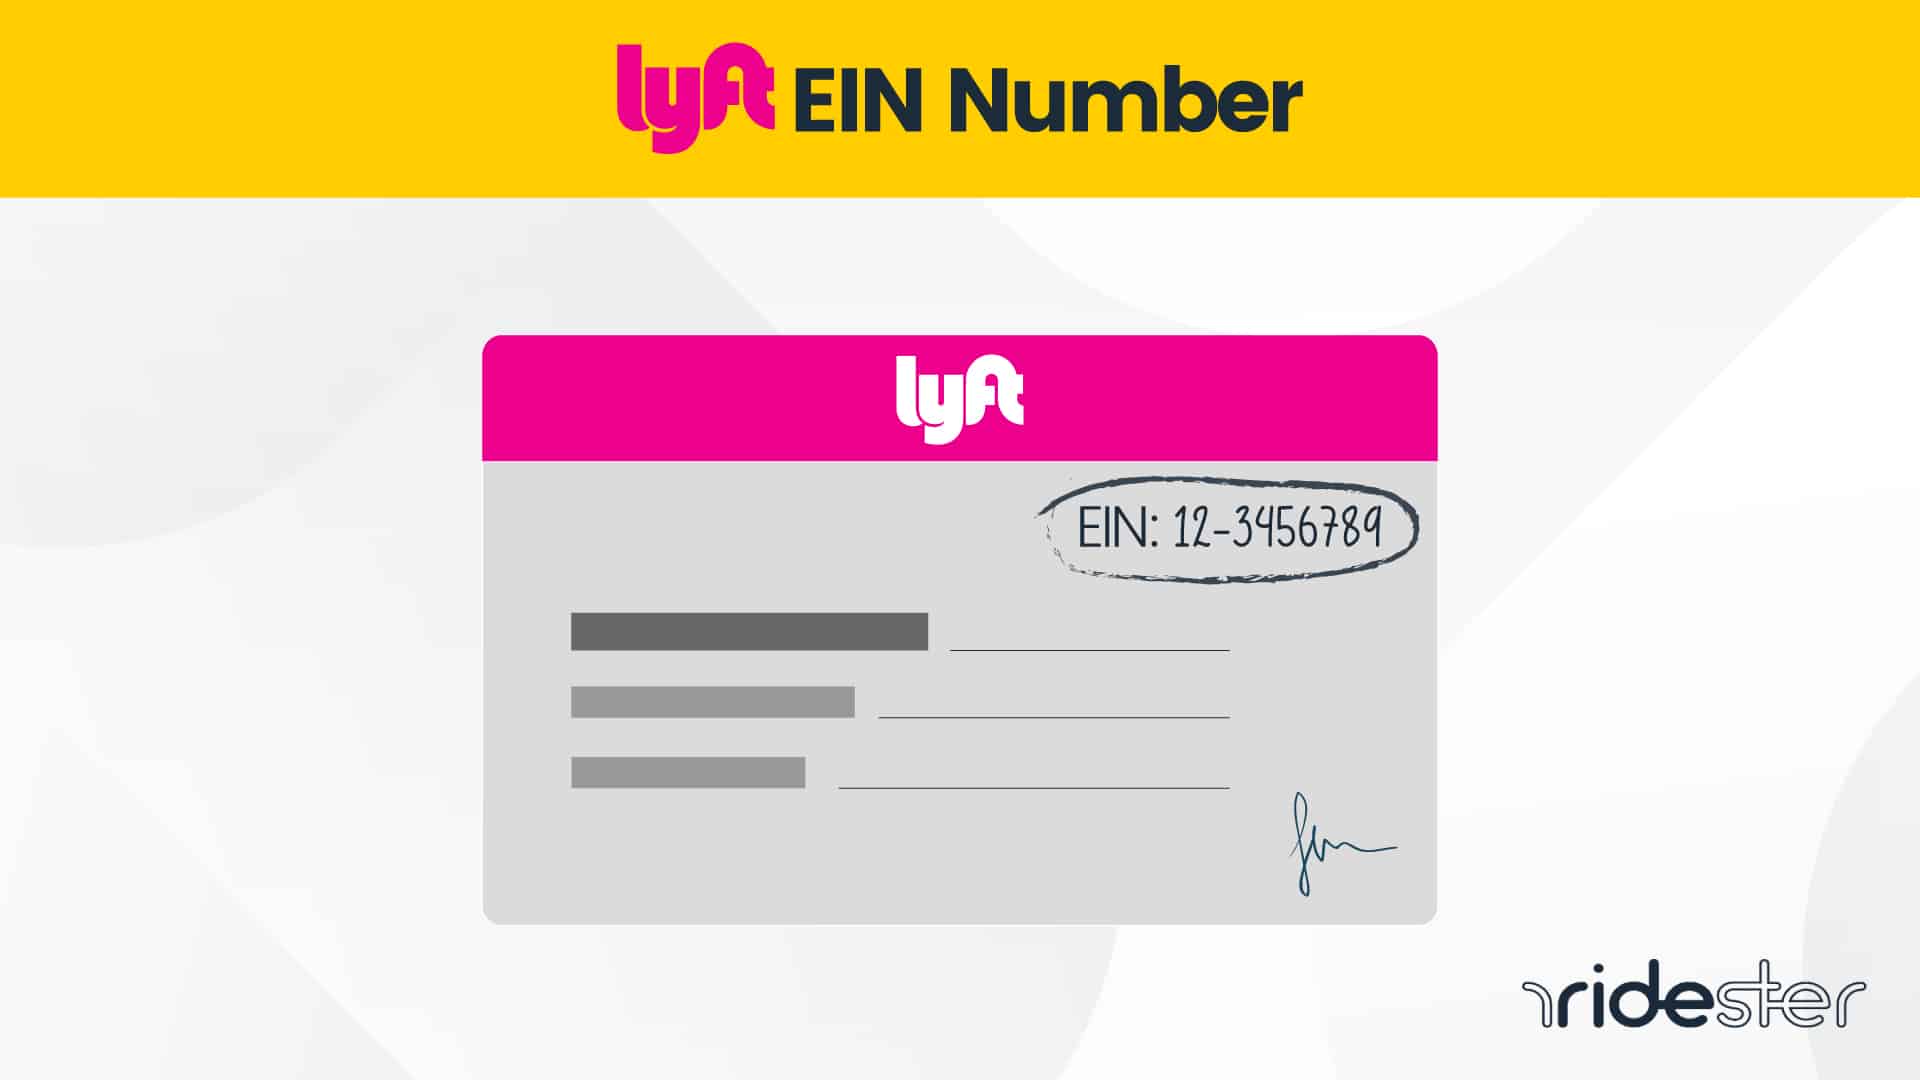 vector graphic illustration showing a hand holding a card with a Lyft ein number on it